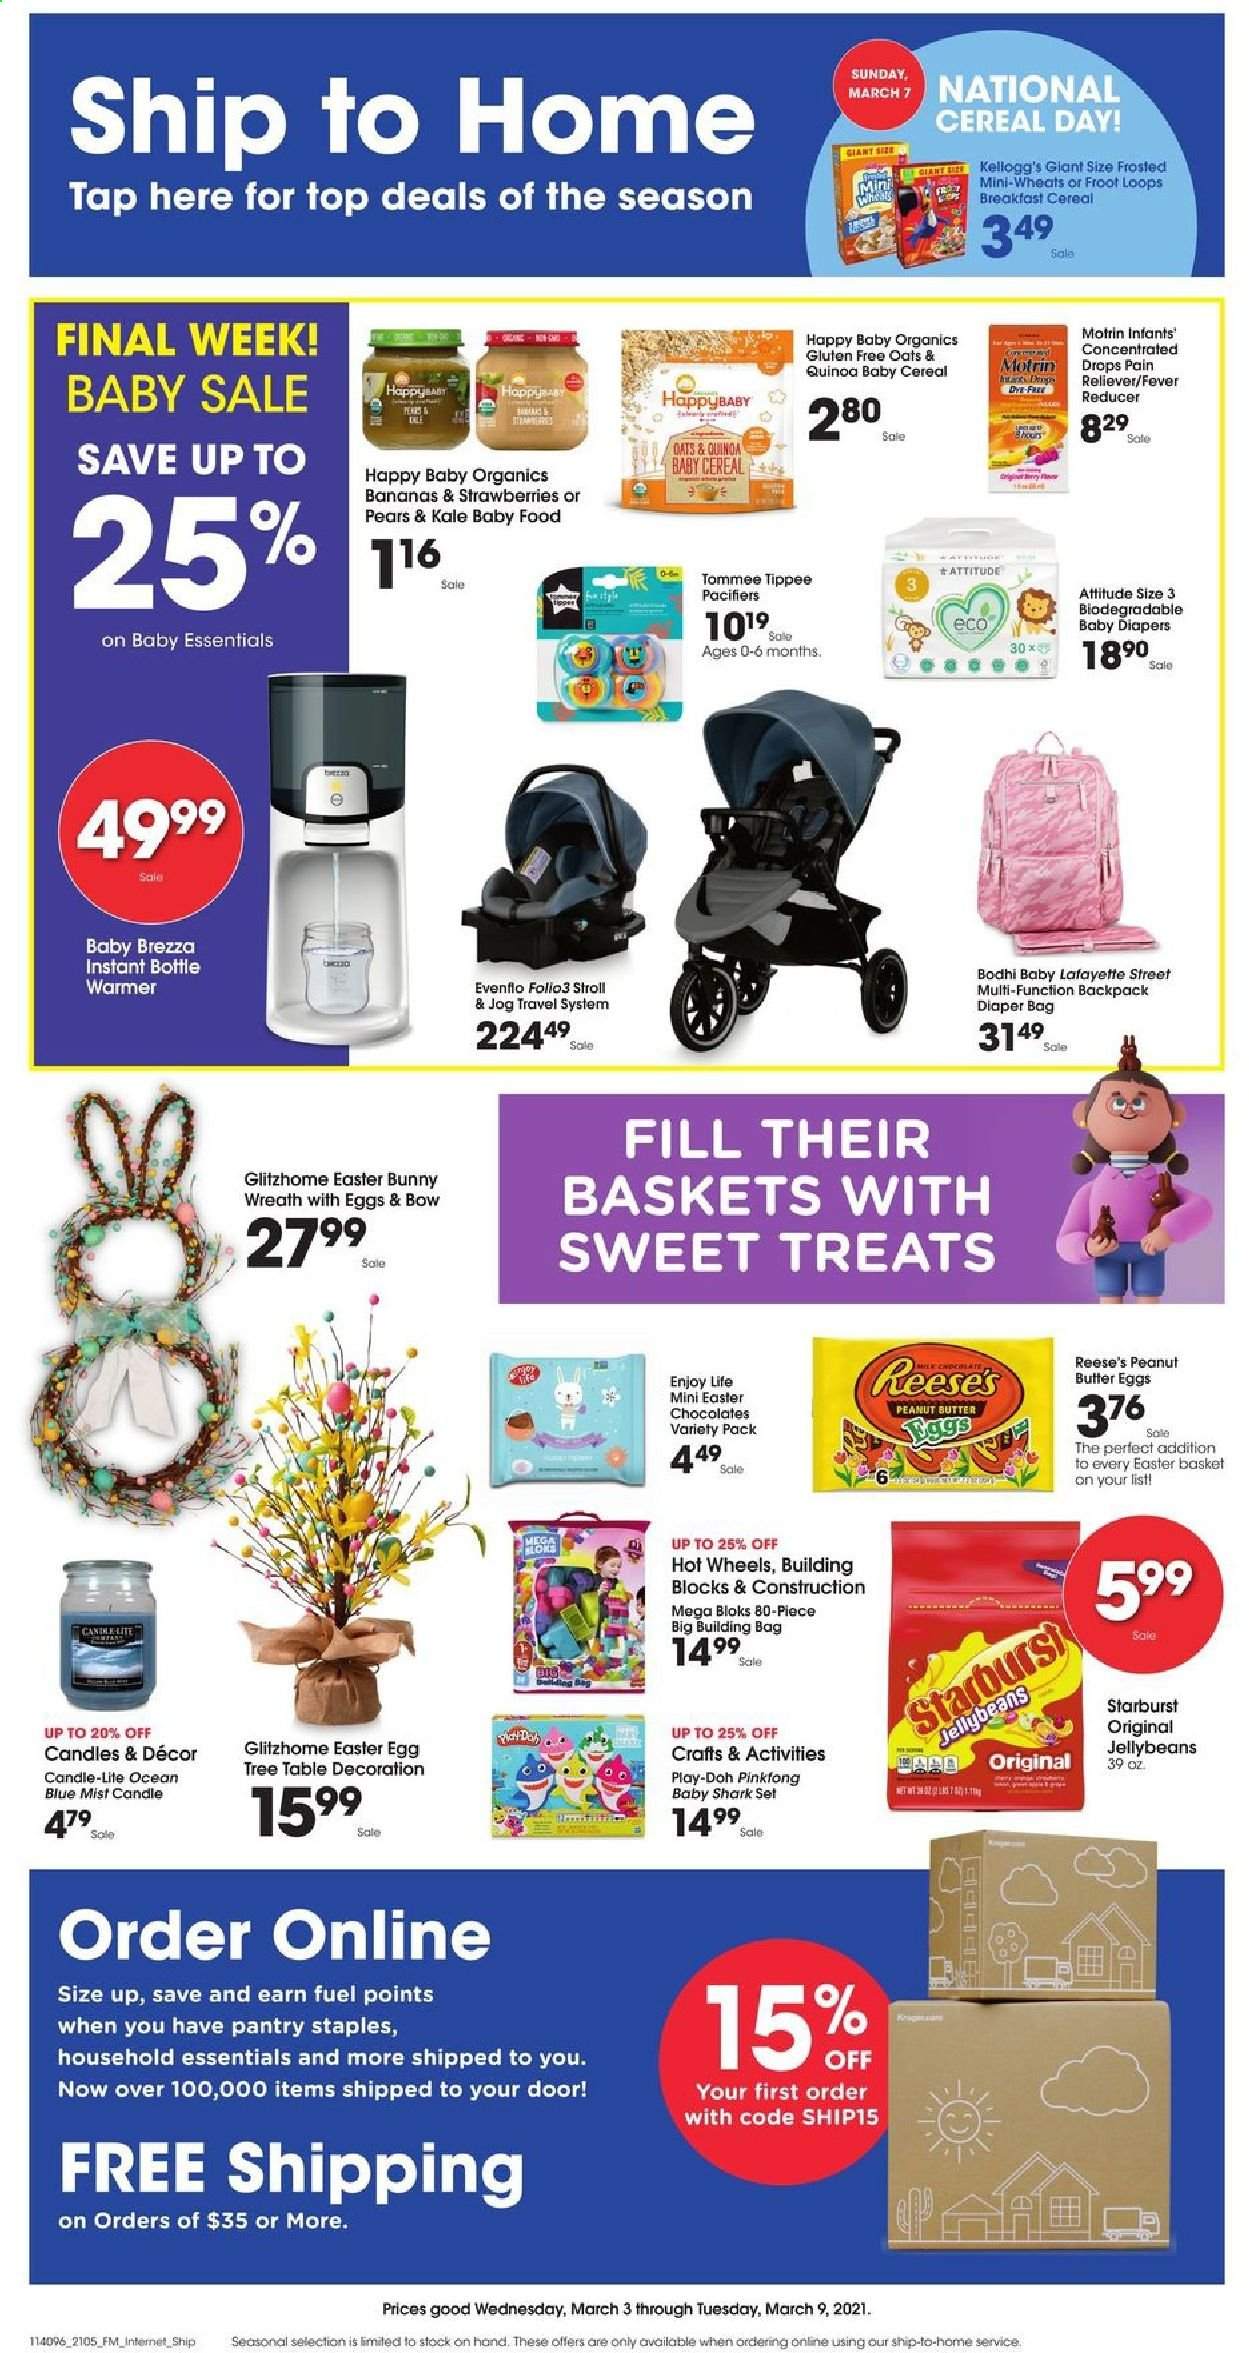 thumbnail - King Soopers Flyer - 03/03/2021 - 03/09/2021 - Sales products - table, wreath, easter egg, bananas, pears, eggs, Reese's, strawberries, chocolate, Starburst, oats, cereals, peanut butter, basket, candle, backpack, bag, building blocks, Mega Bloks, Play-doh, Hot Wheels, Motrin. Page 1.